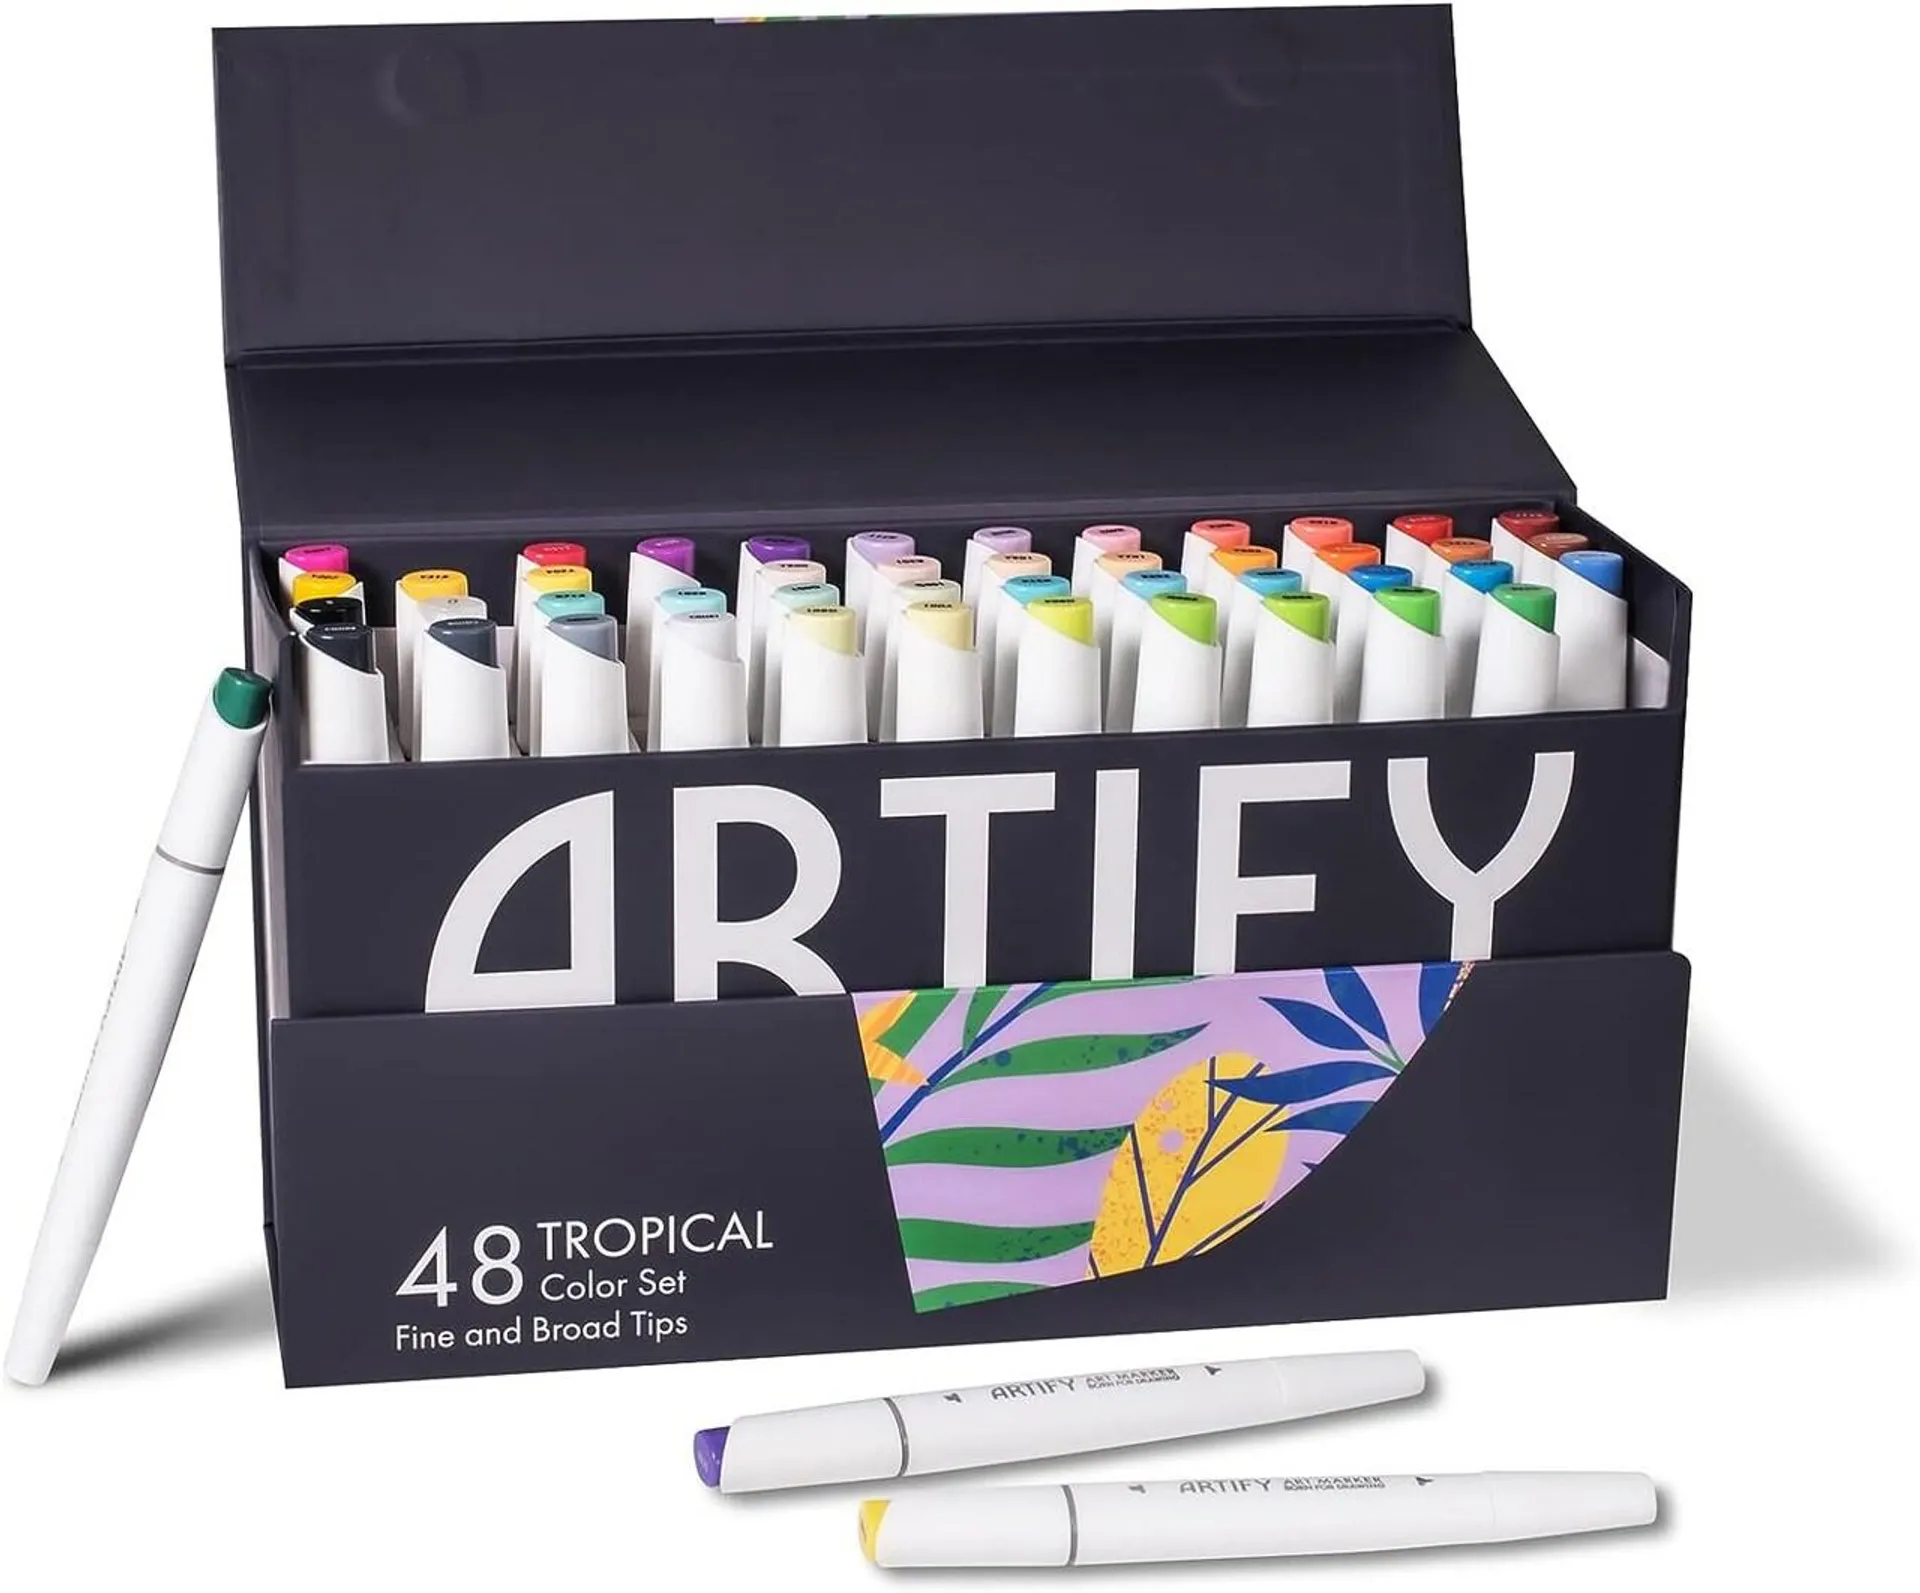 ARTIFY 48 Tropical Colors Art Markers, Fine & Broad Dual Tips Professional Artist Markers in Case, Drawing Marker Set with Carrying Case